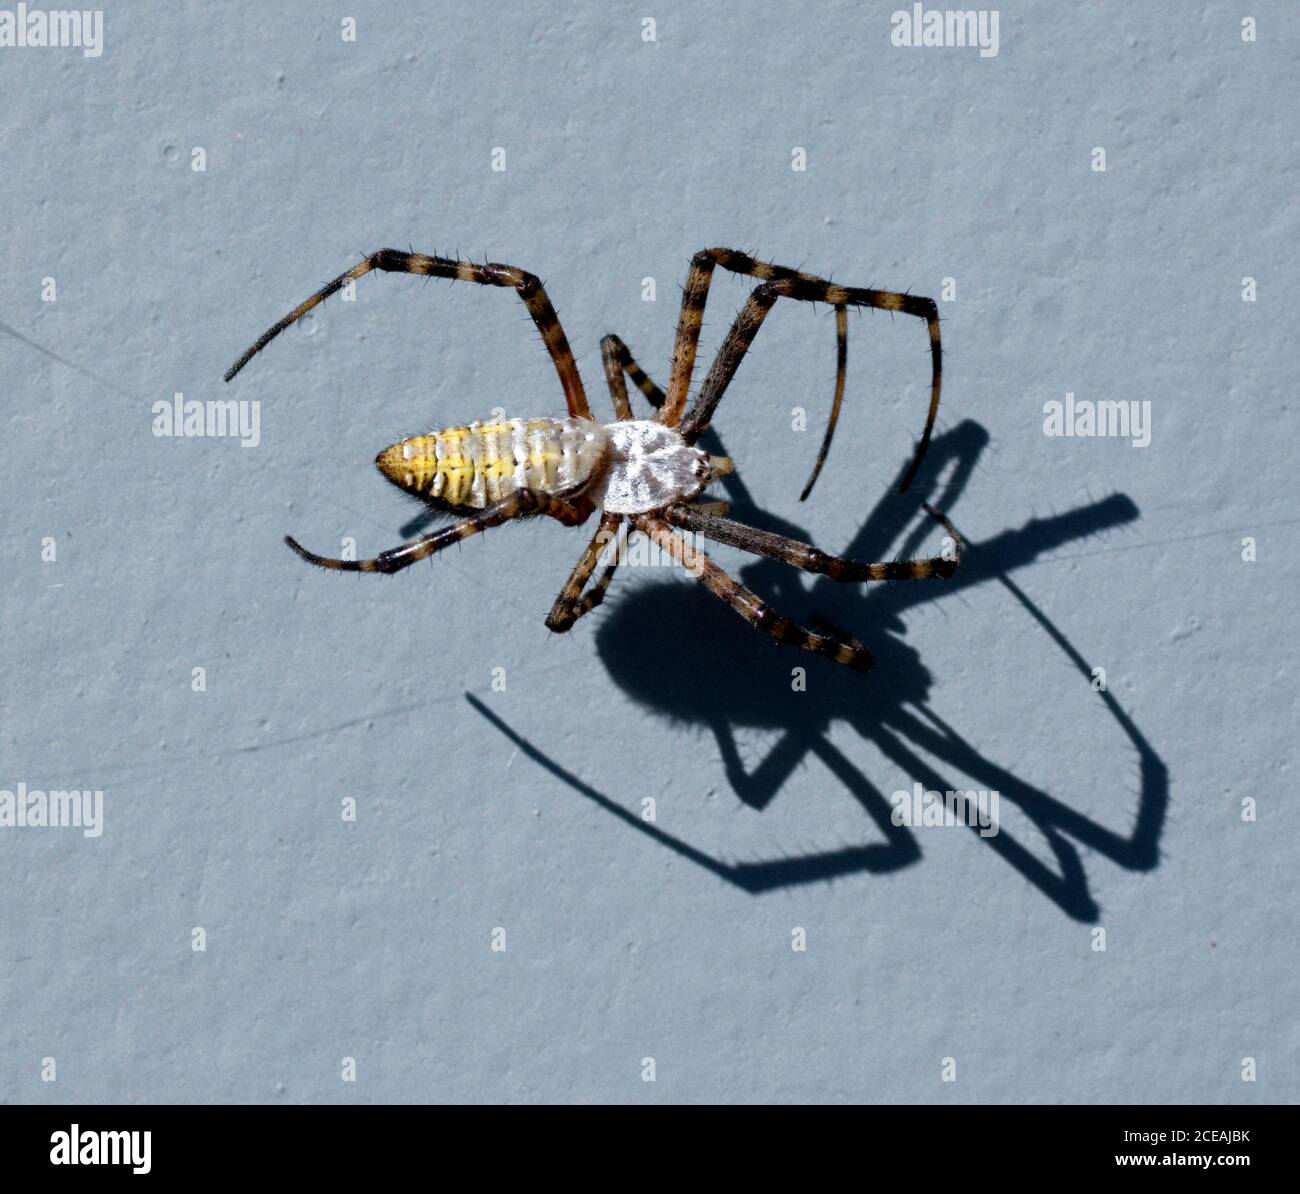 Banded Garden Spider, Argiope trifasciata, or Banded Orb Weaving Spider, female, dorsal view, with scary shadow. Stock Photo